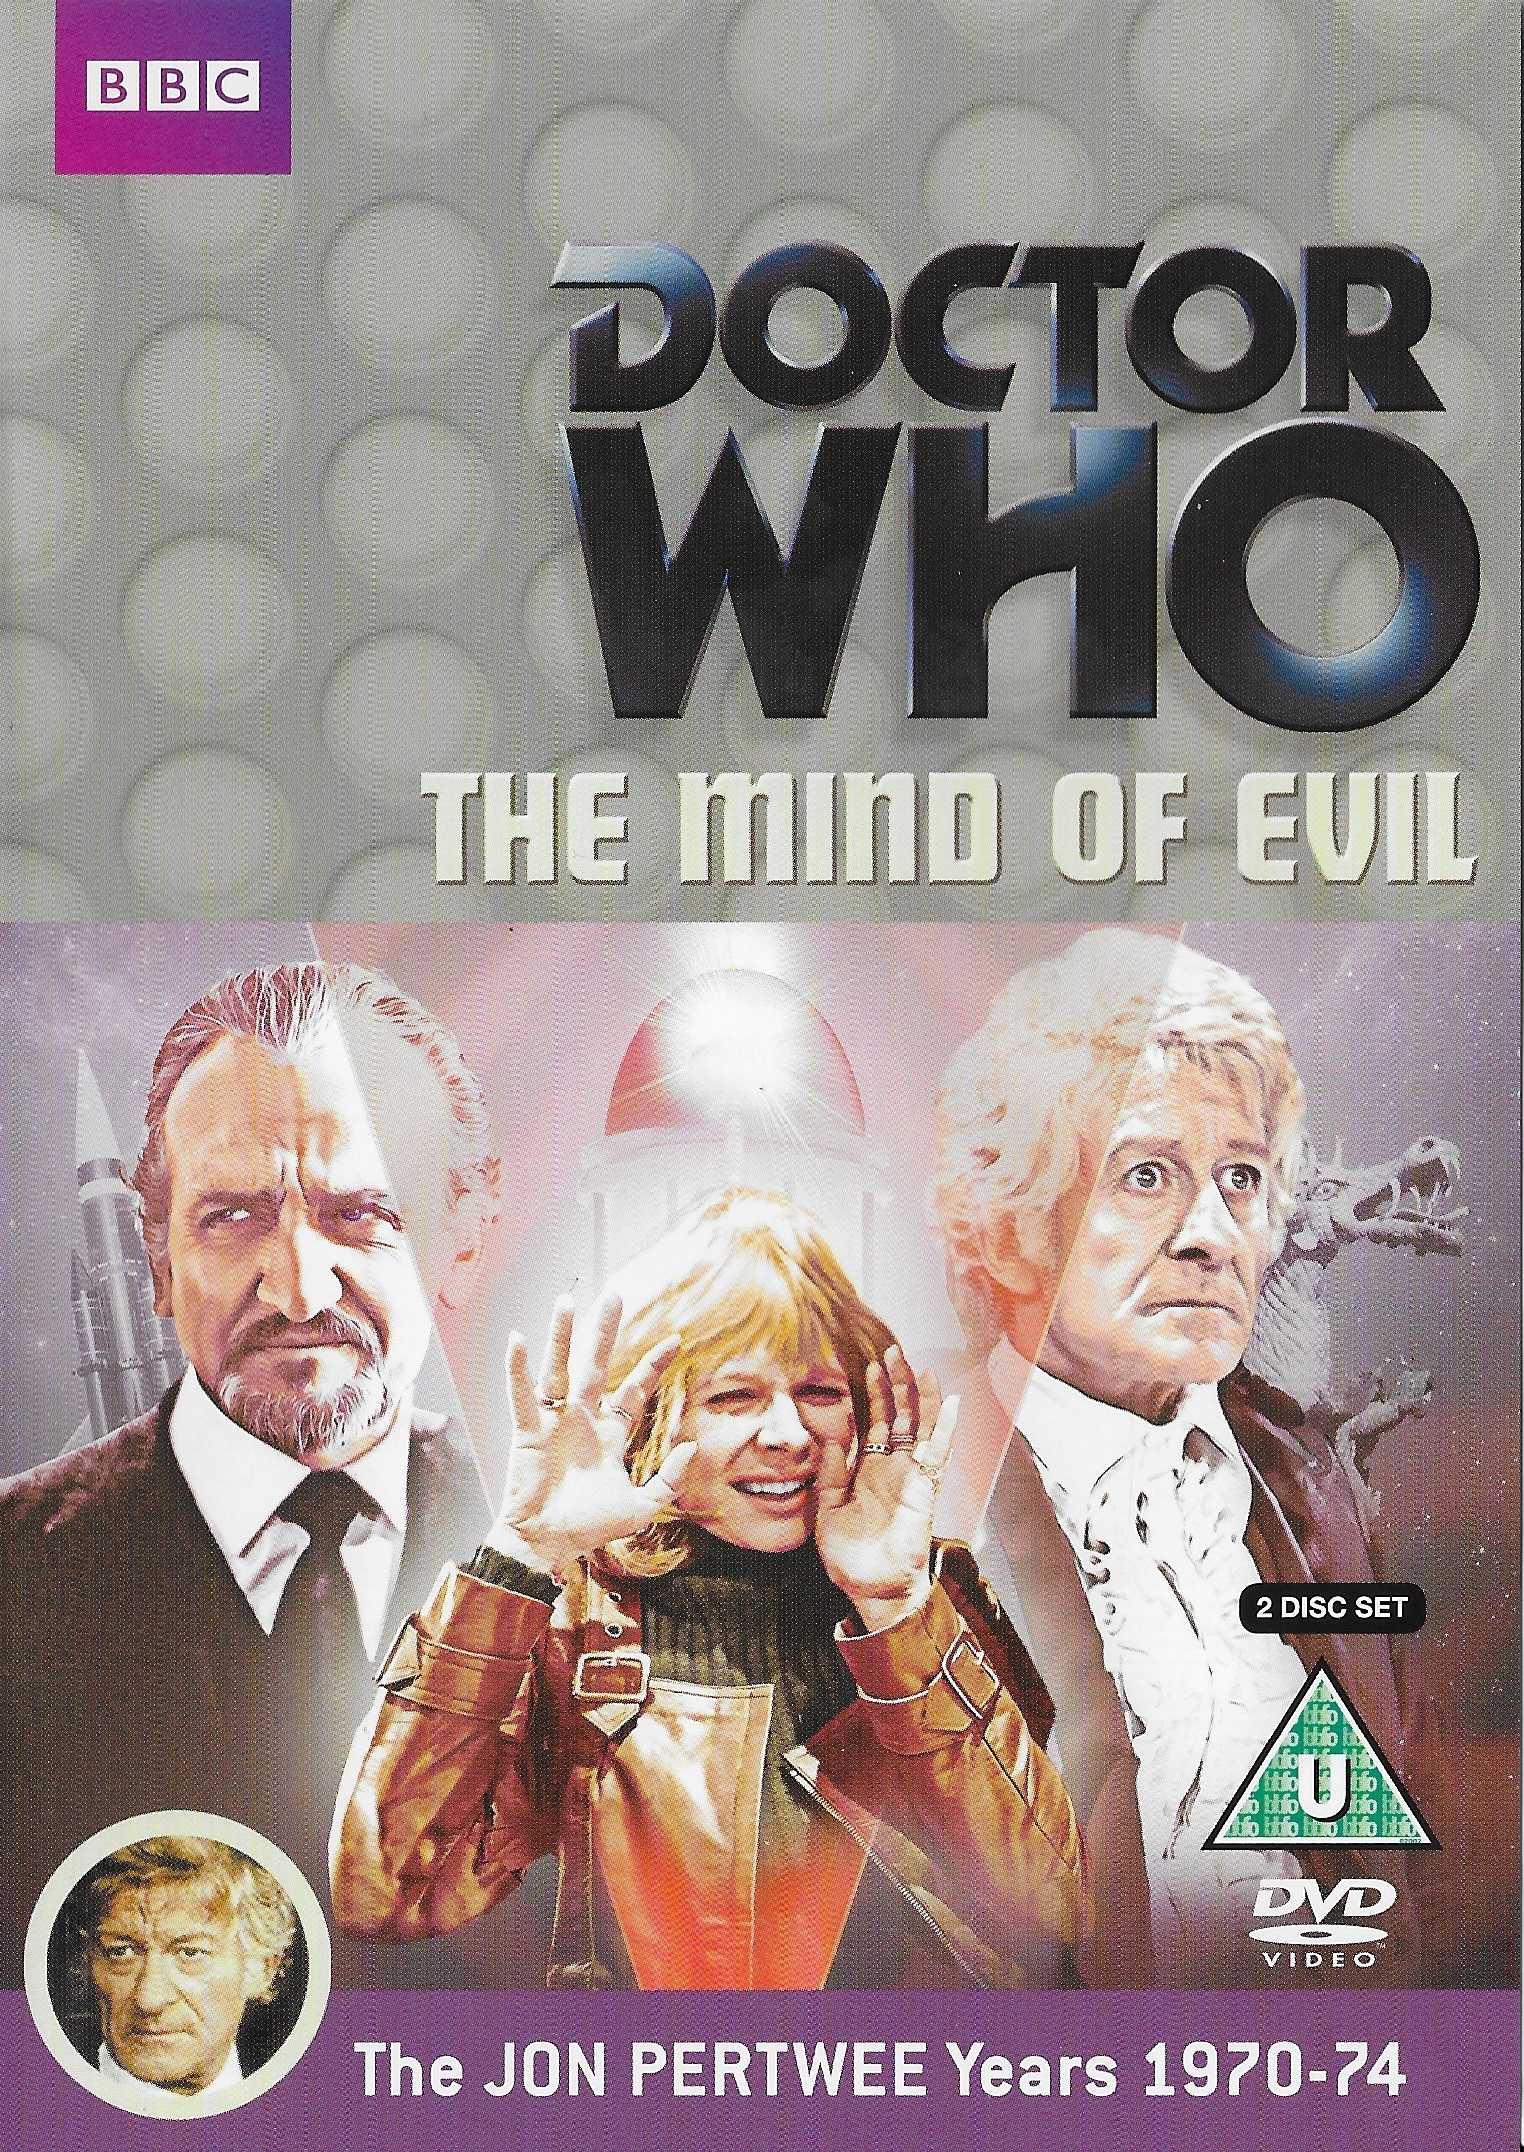 Picture of BBCDVD 3269 Doctor Who - The mind of evil by artist Robert Holmes from the BBC dvds - Records and Tapes library